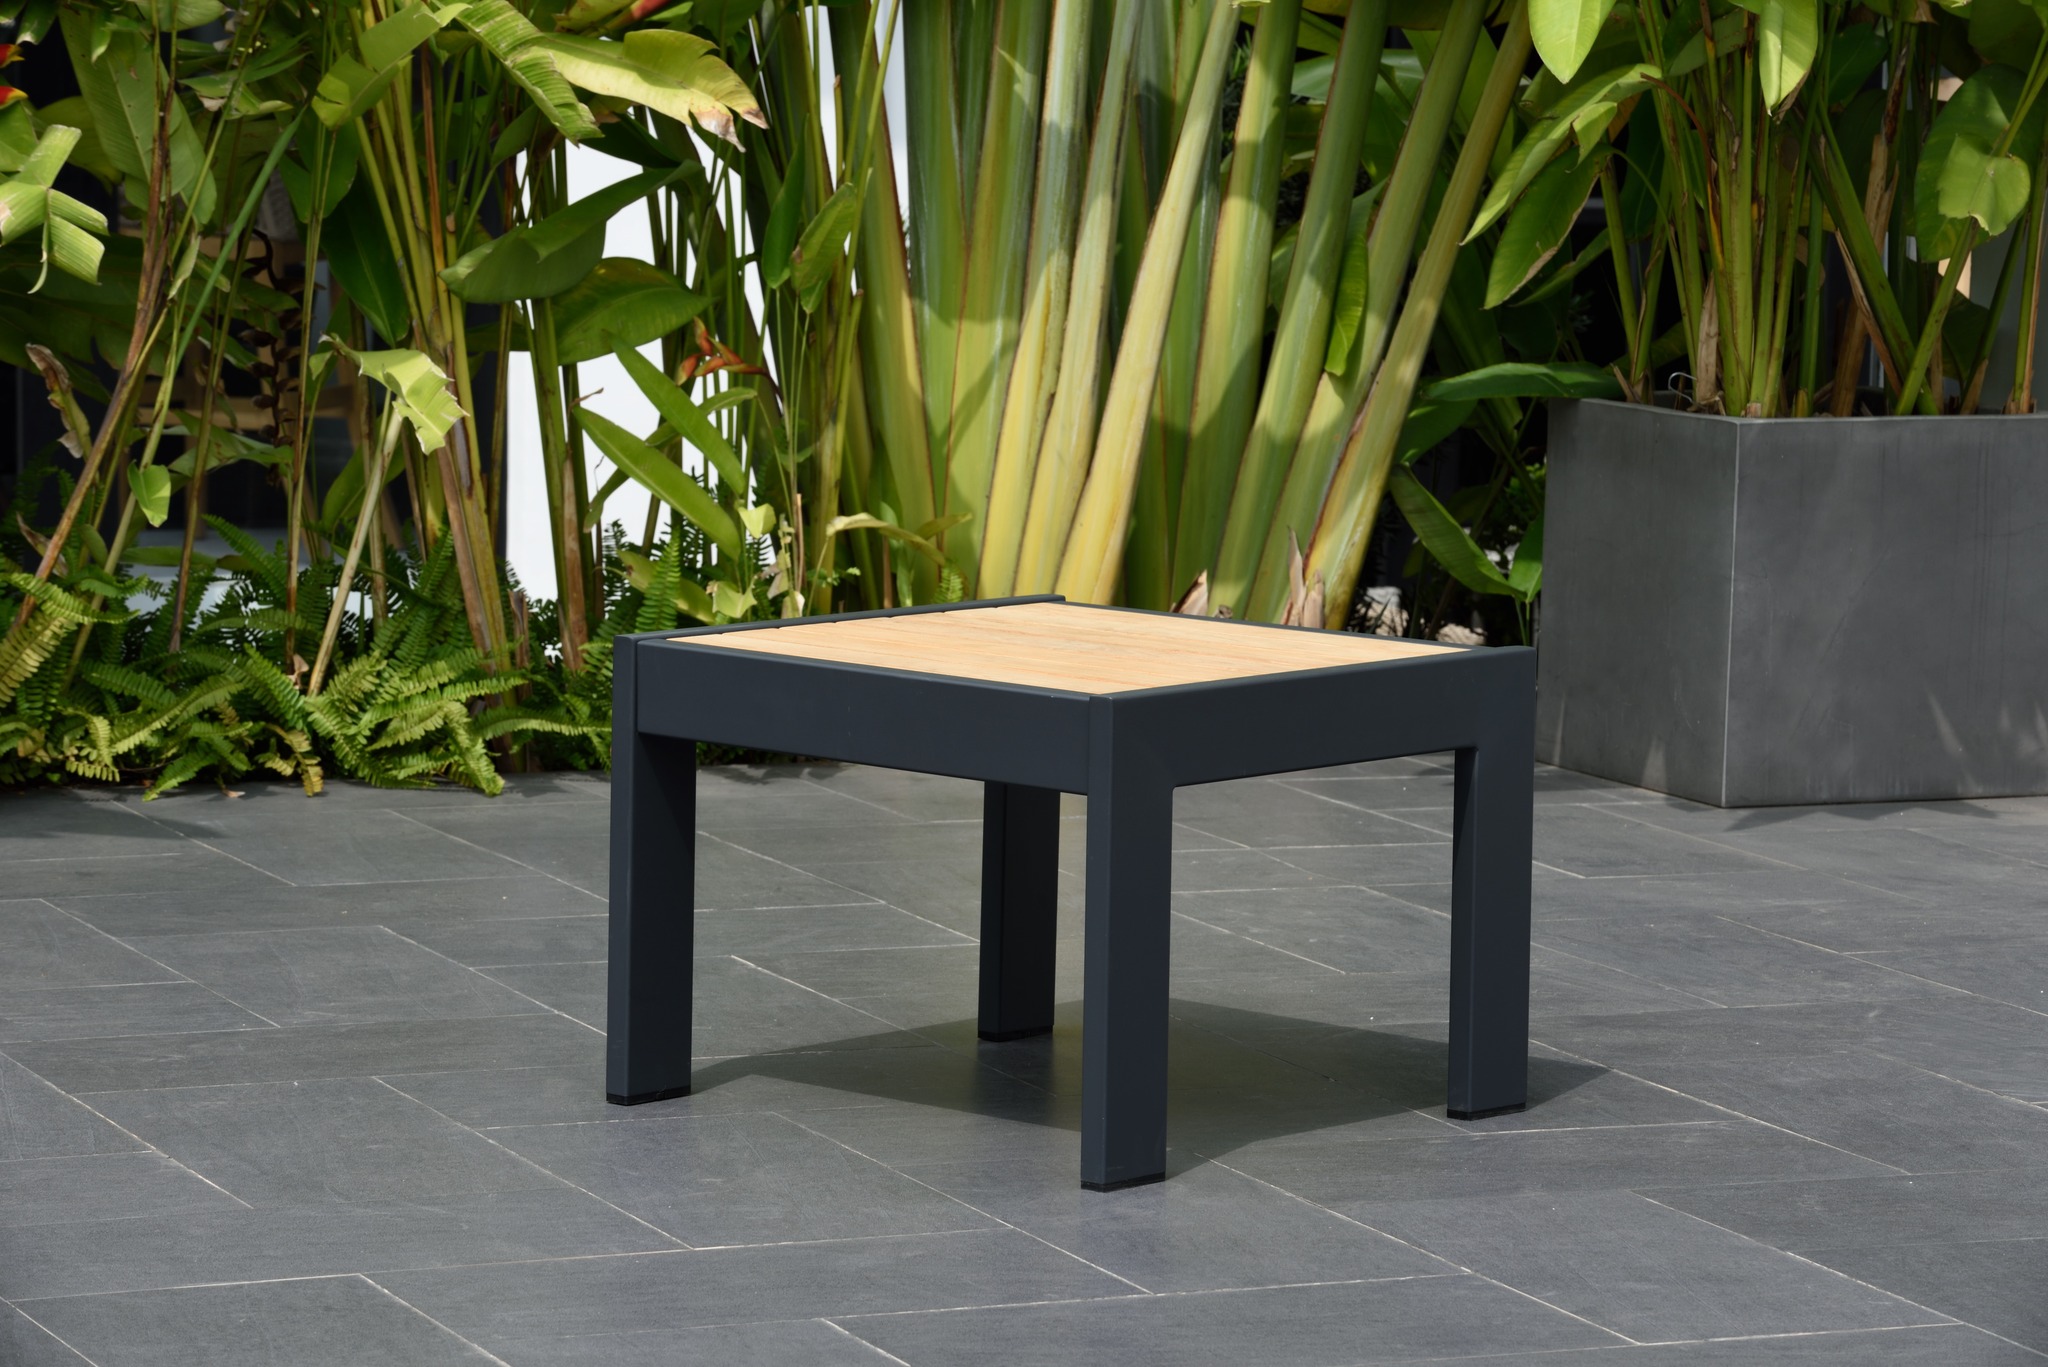 Palau is a range that can entirely transform outdoor or semi-outdoor spaces, bringing a lush, relaxing vibe to any occas... » Outdoor Furniture Fuengirola, Costa Del Sol, Spain